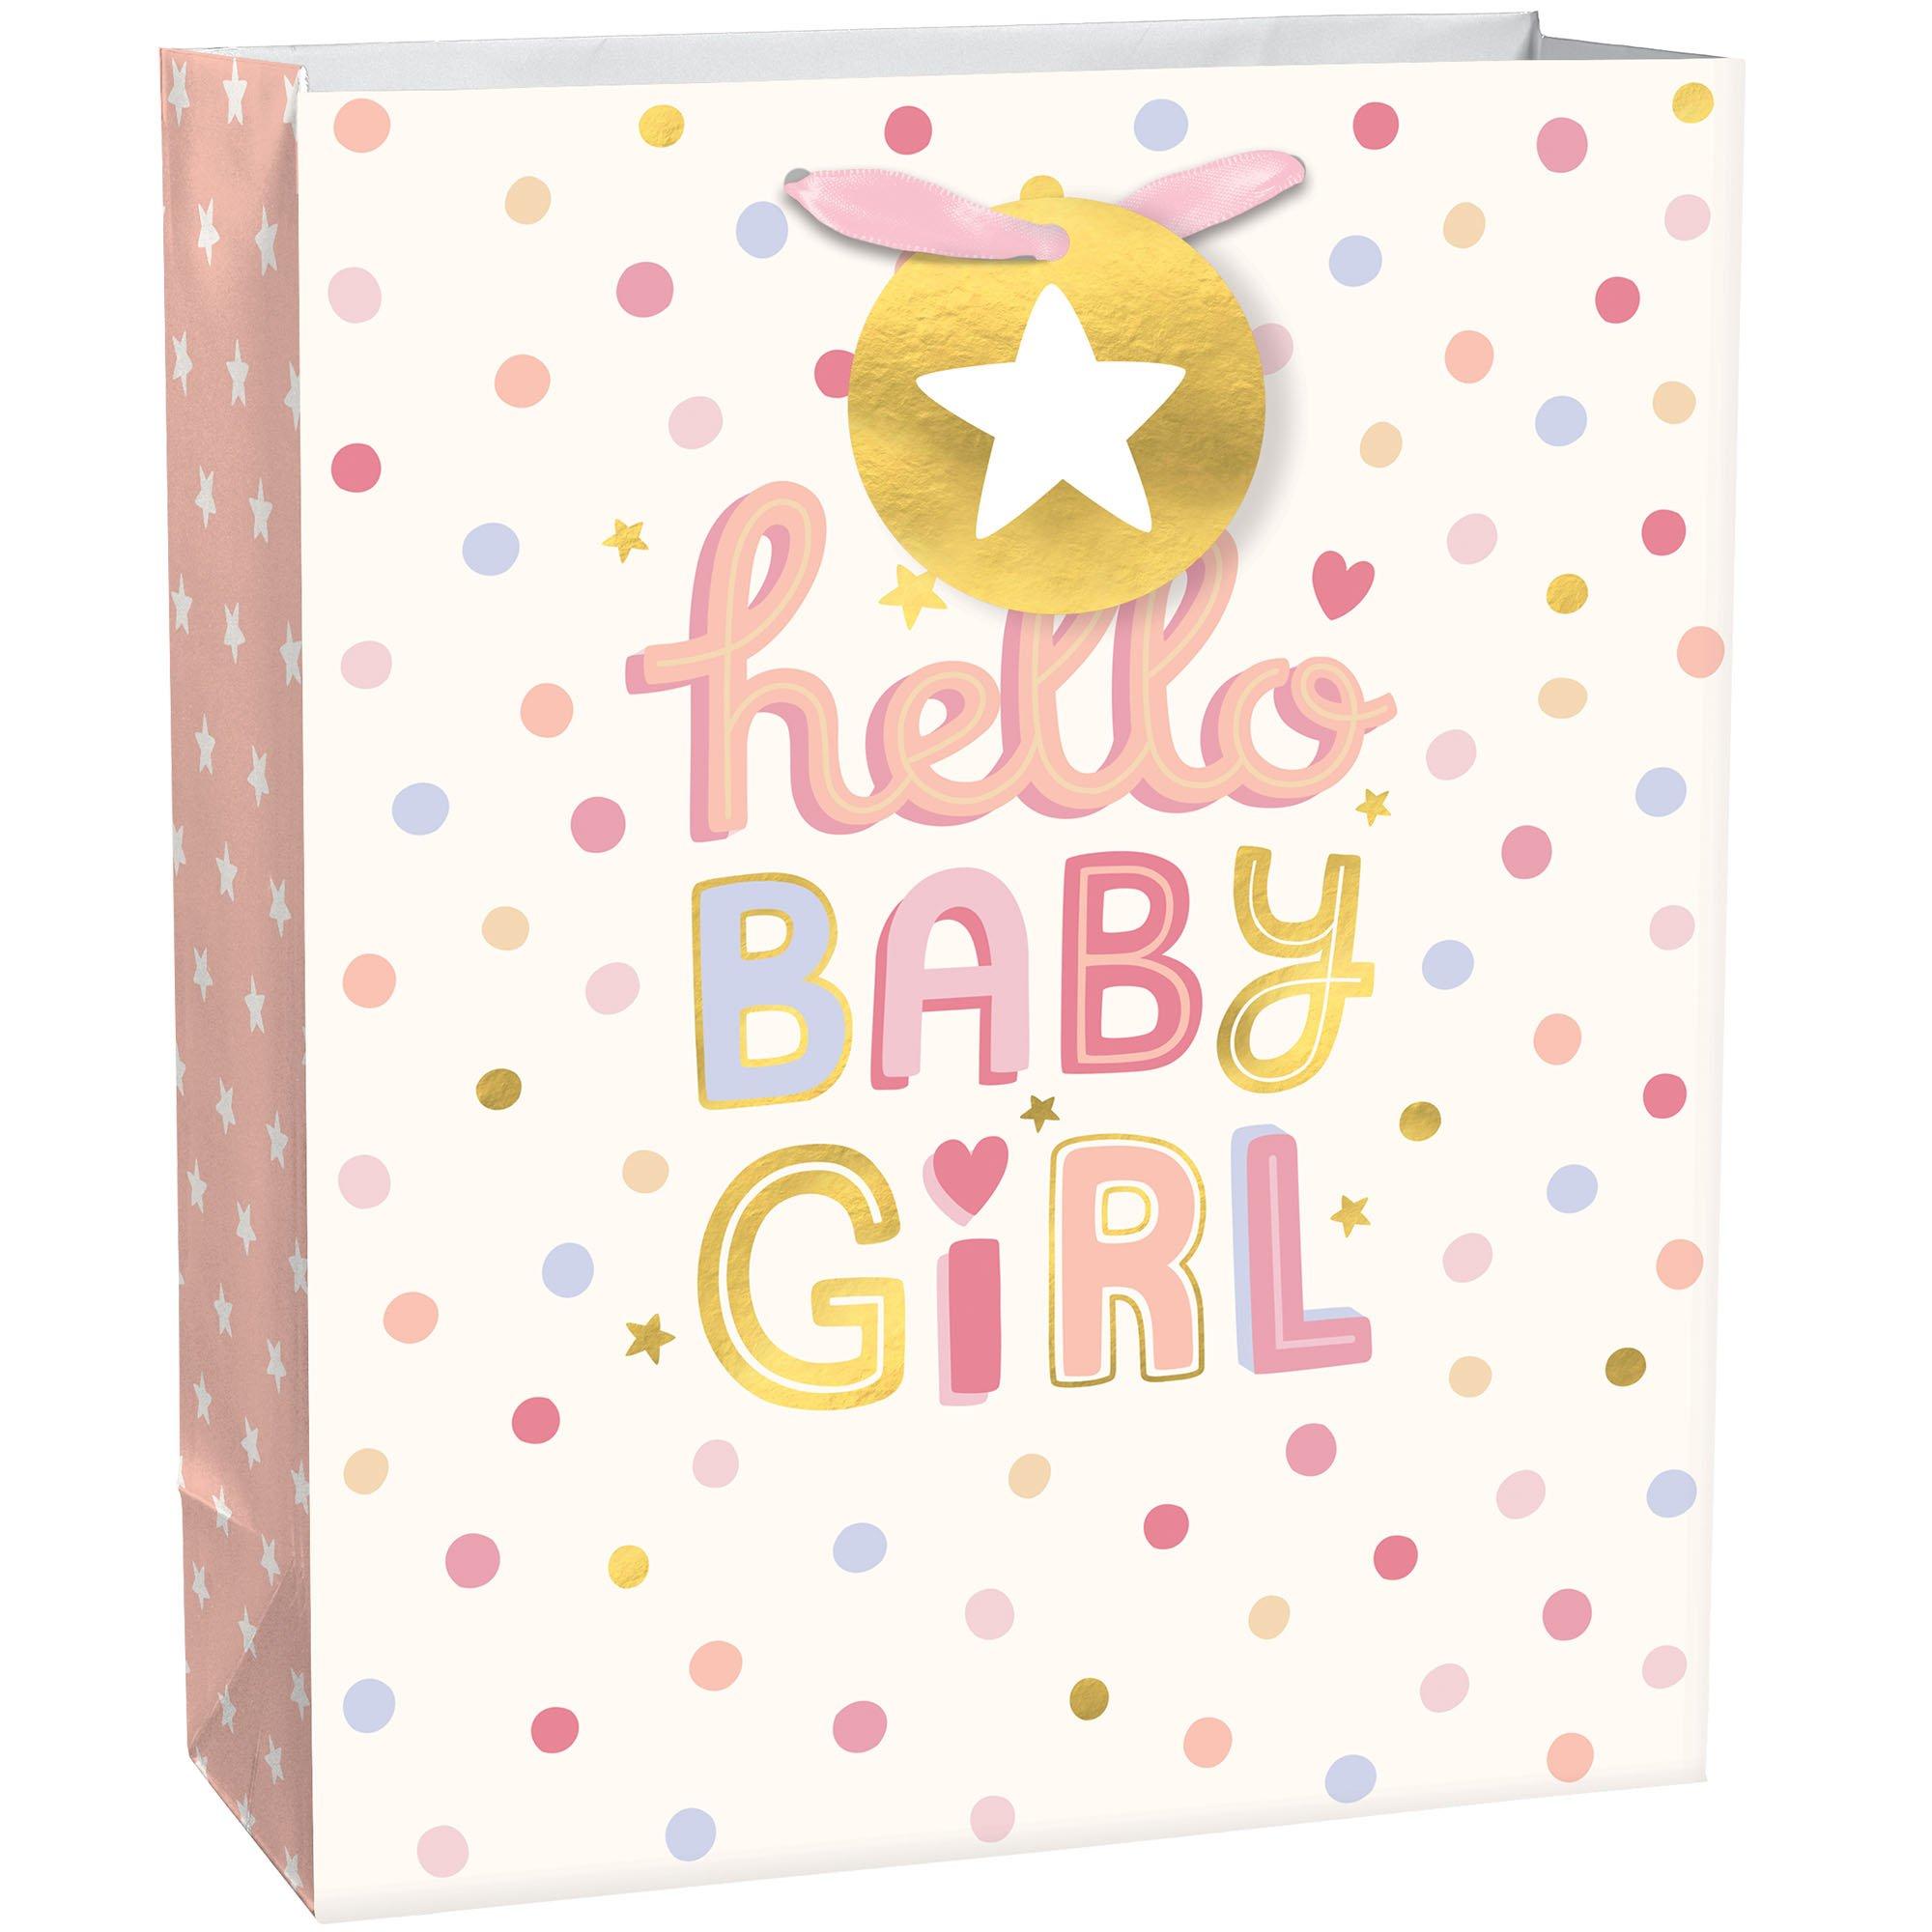 Hallmark 9 inch Medium Gift Bag with Tissue Paper (Pink Glitter Stripes) for Birthdays, Mothers Day, Baby Showers, Easter, Bridal Showers or Any